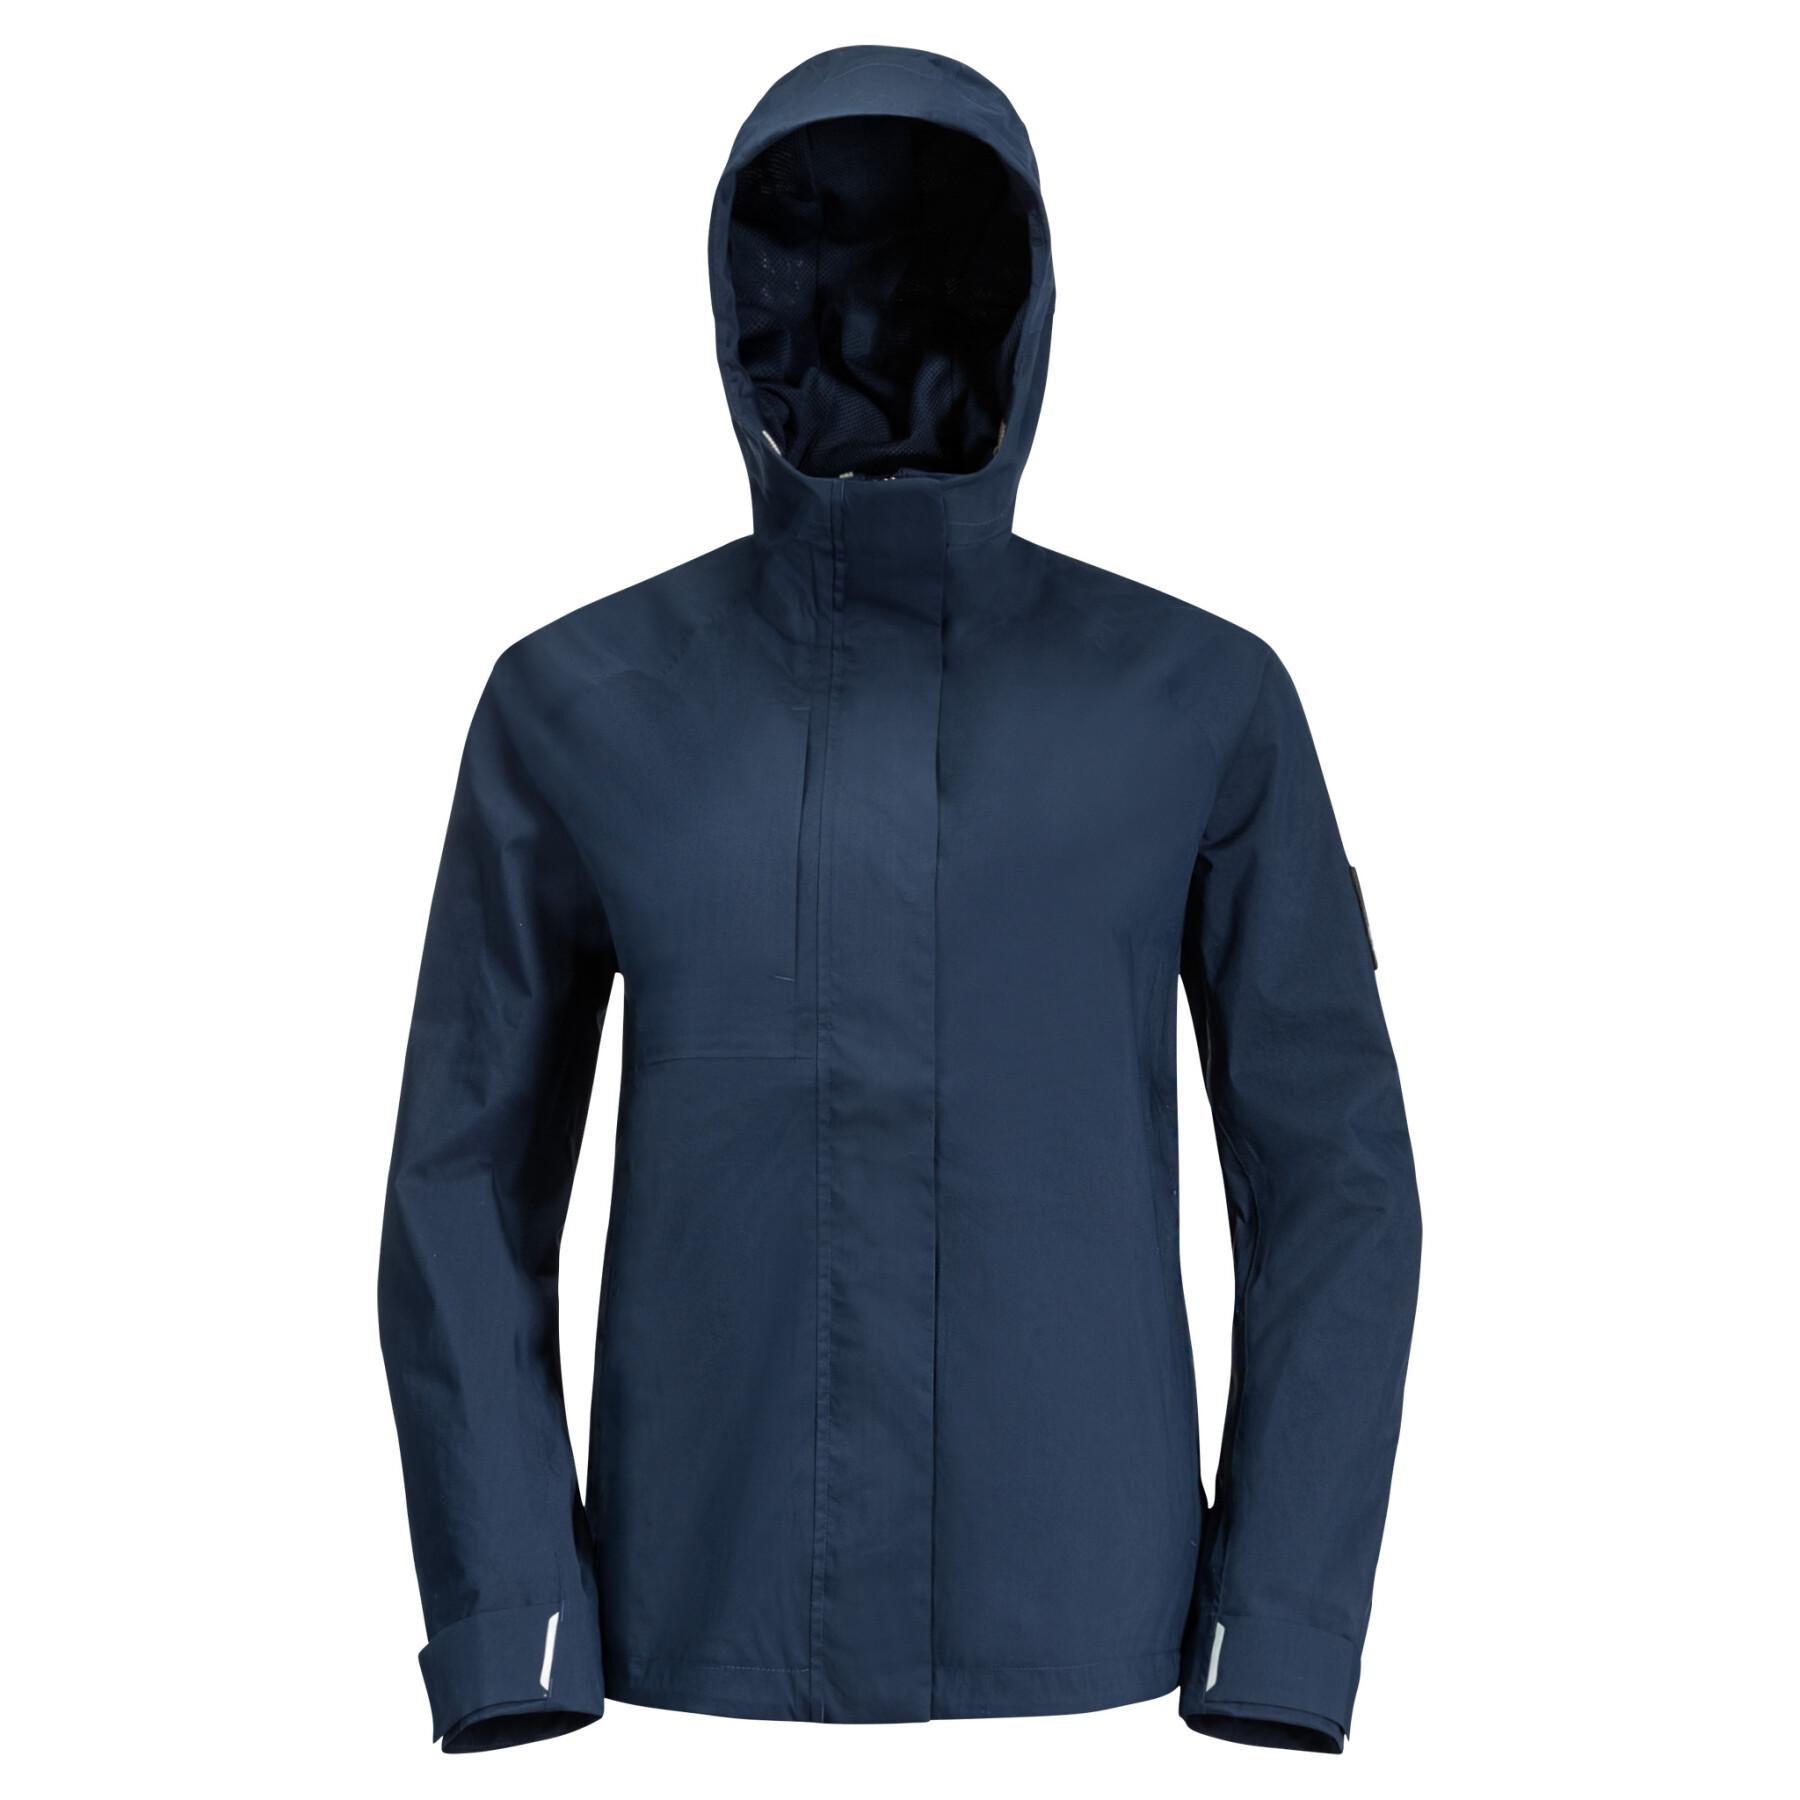 Chaqueta impermeable para mujer Jack Wolfskin Nature XXL